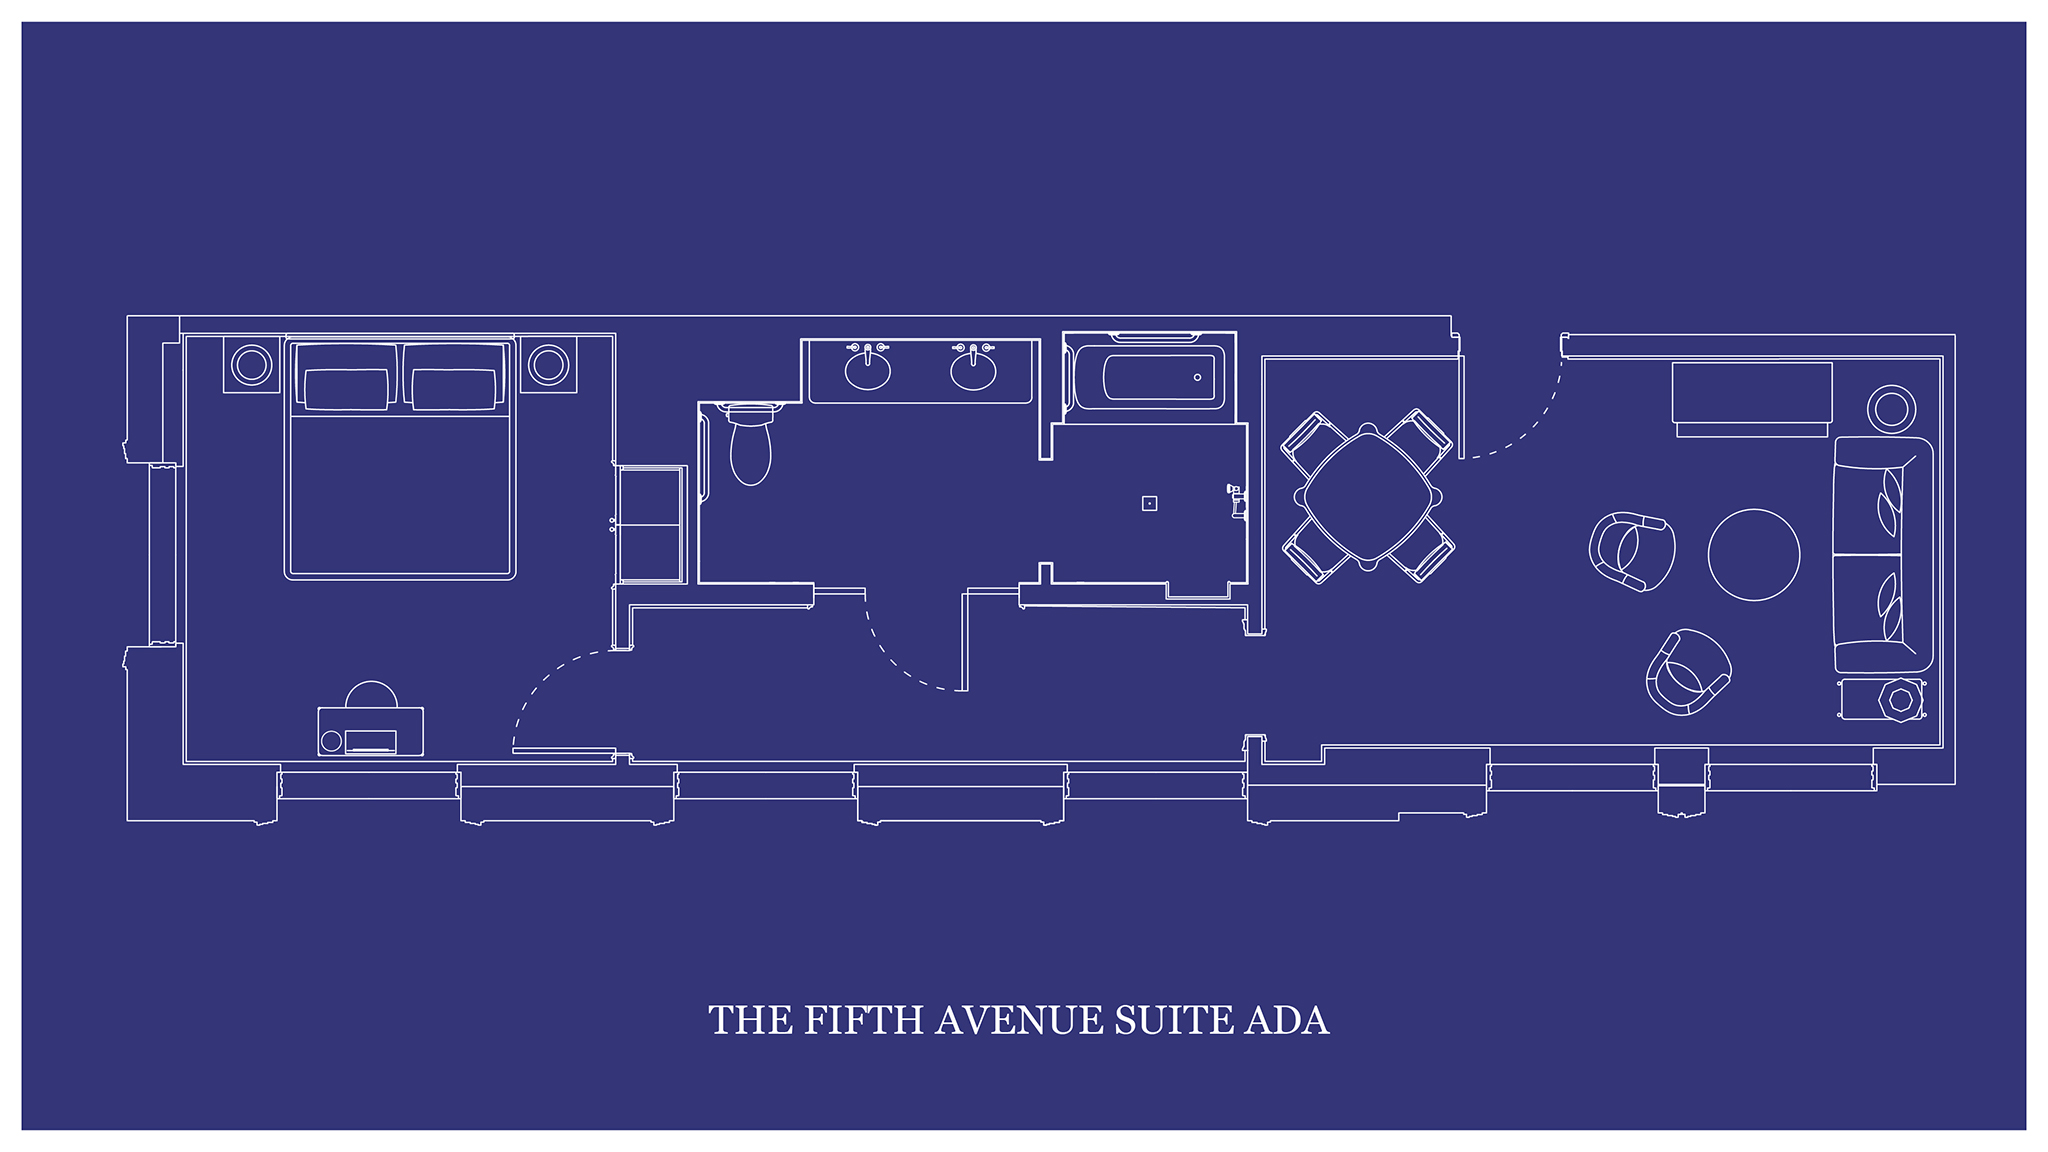 Blueprint map of "THE FIFTH AVENUE SUITE ADA" rendered in intricate detail and design.